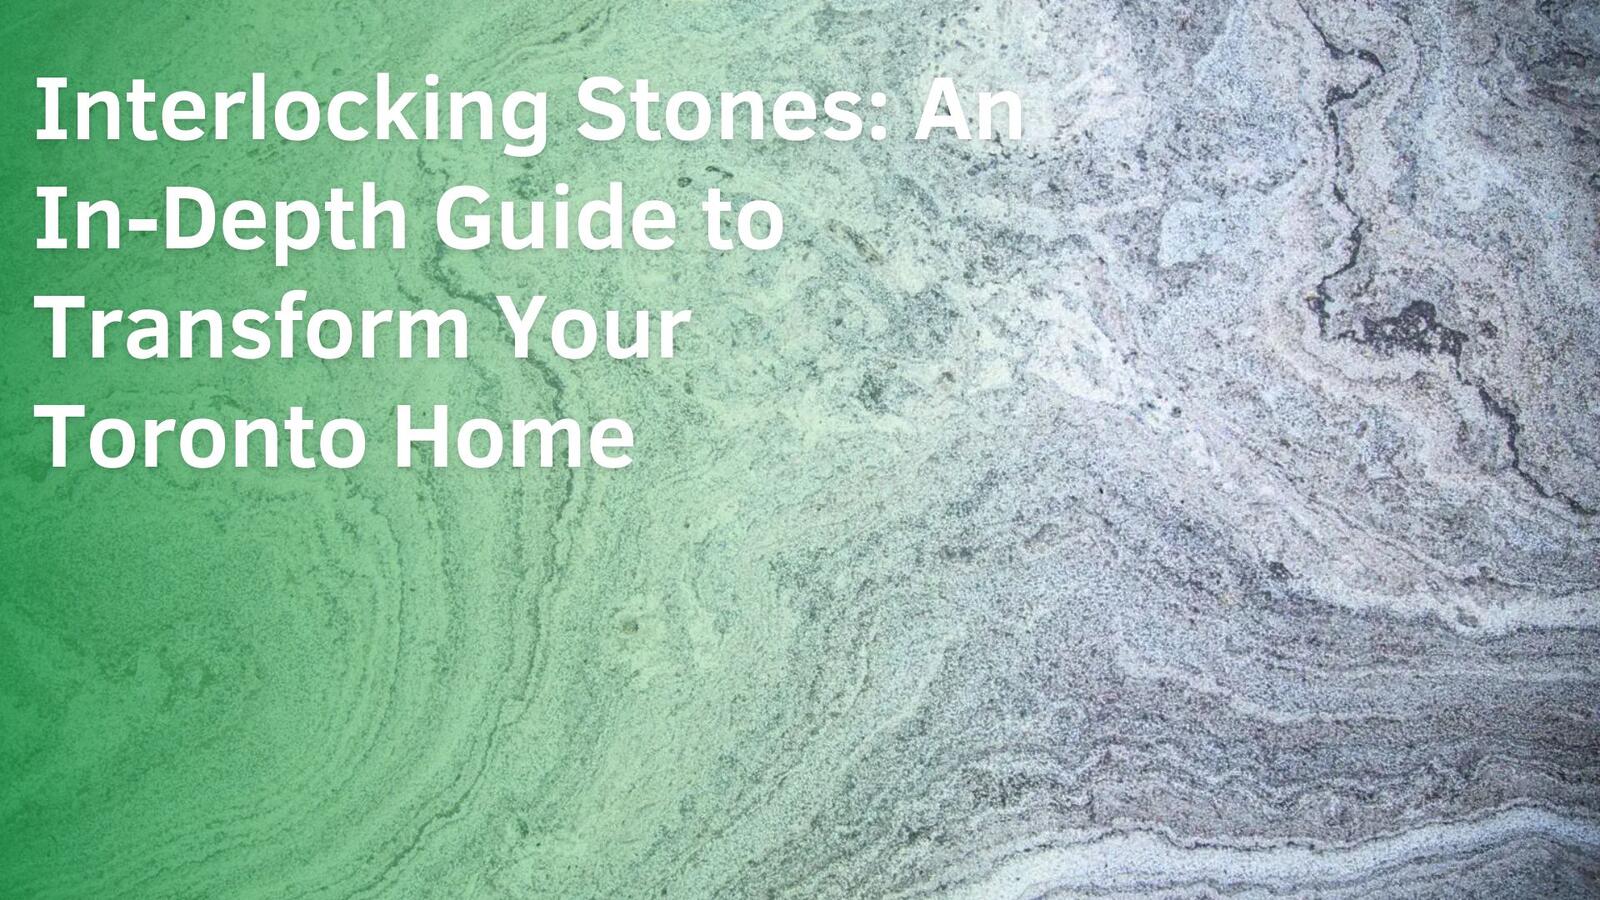 Interlocking Stones: An In-Depth Guide to Transform Your Toronto Home